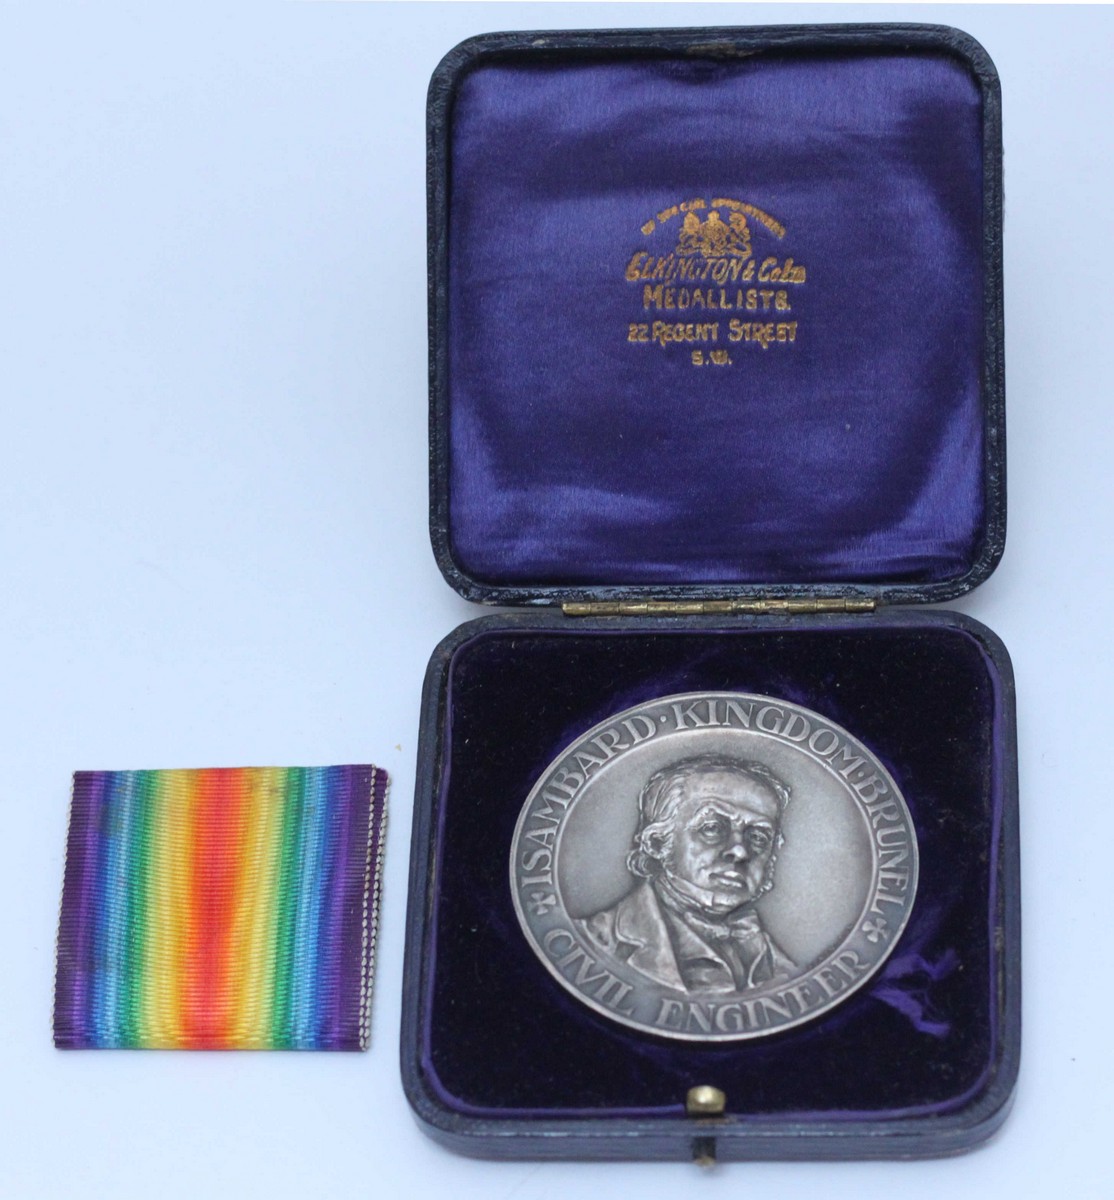 London School of Economics, a silver award medal by Elkington, with relief moulded bust of